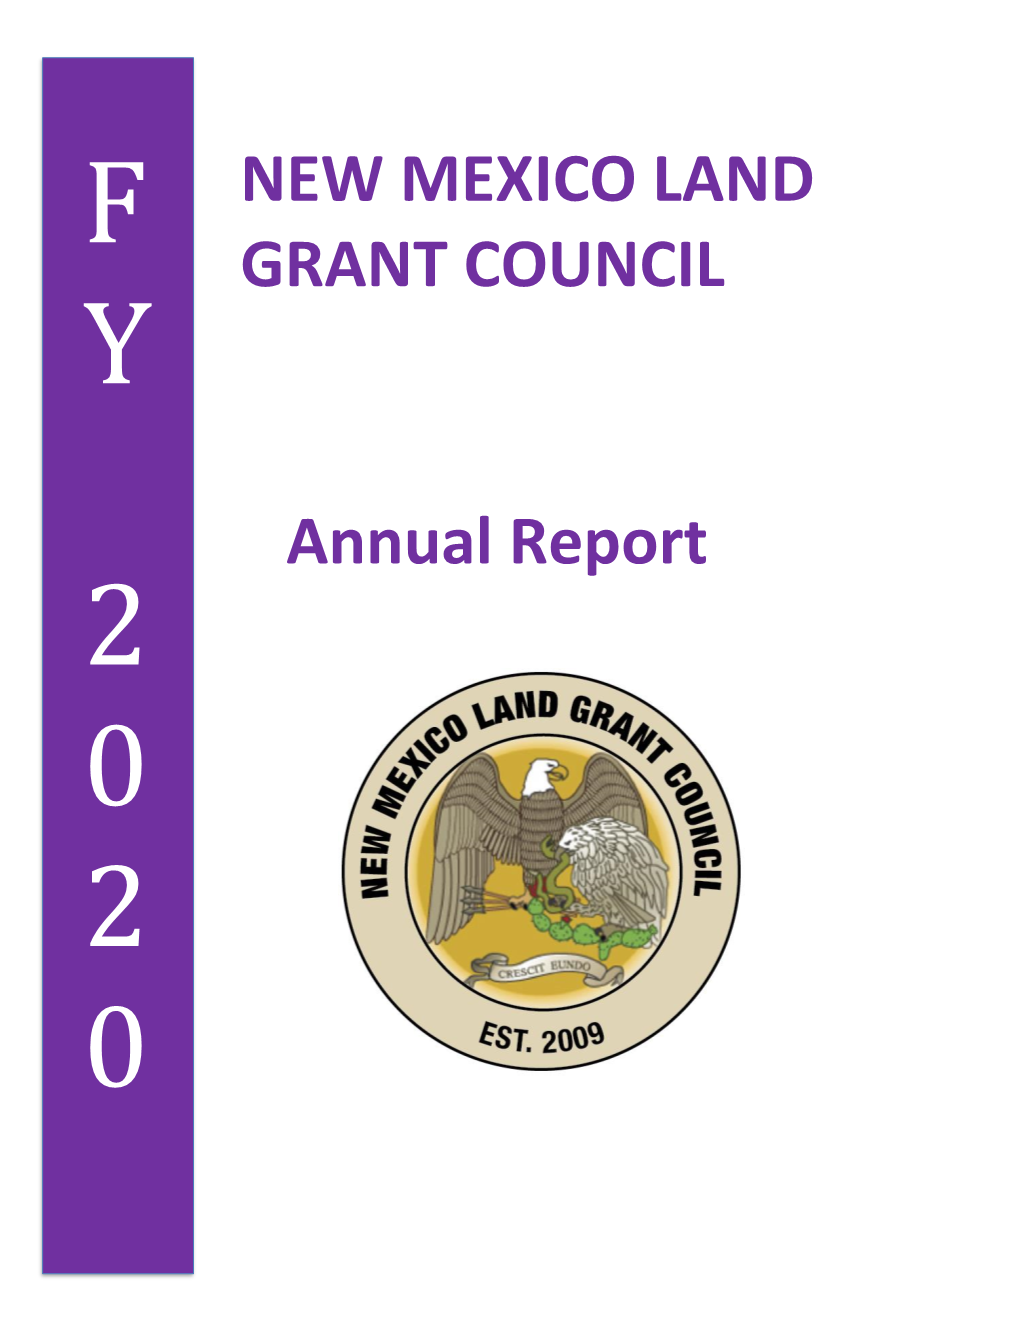 New Mexico Land Grant Council Annual Report FY 2020